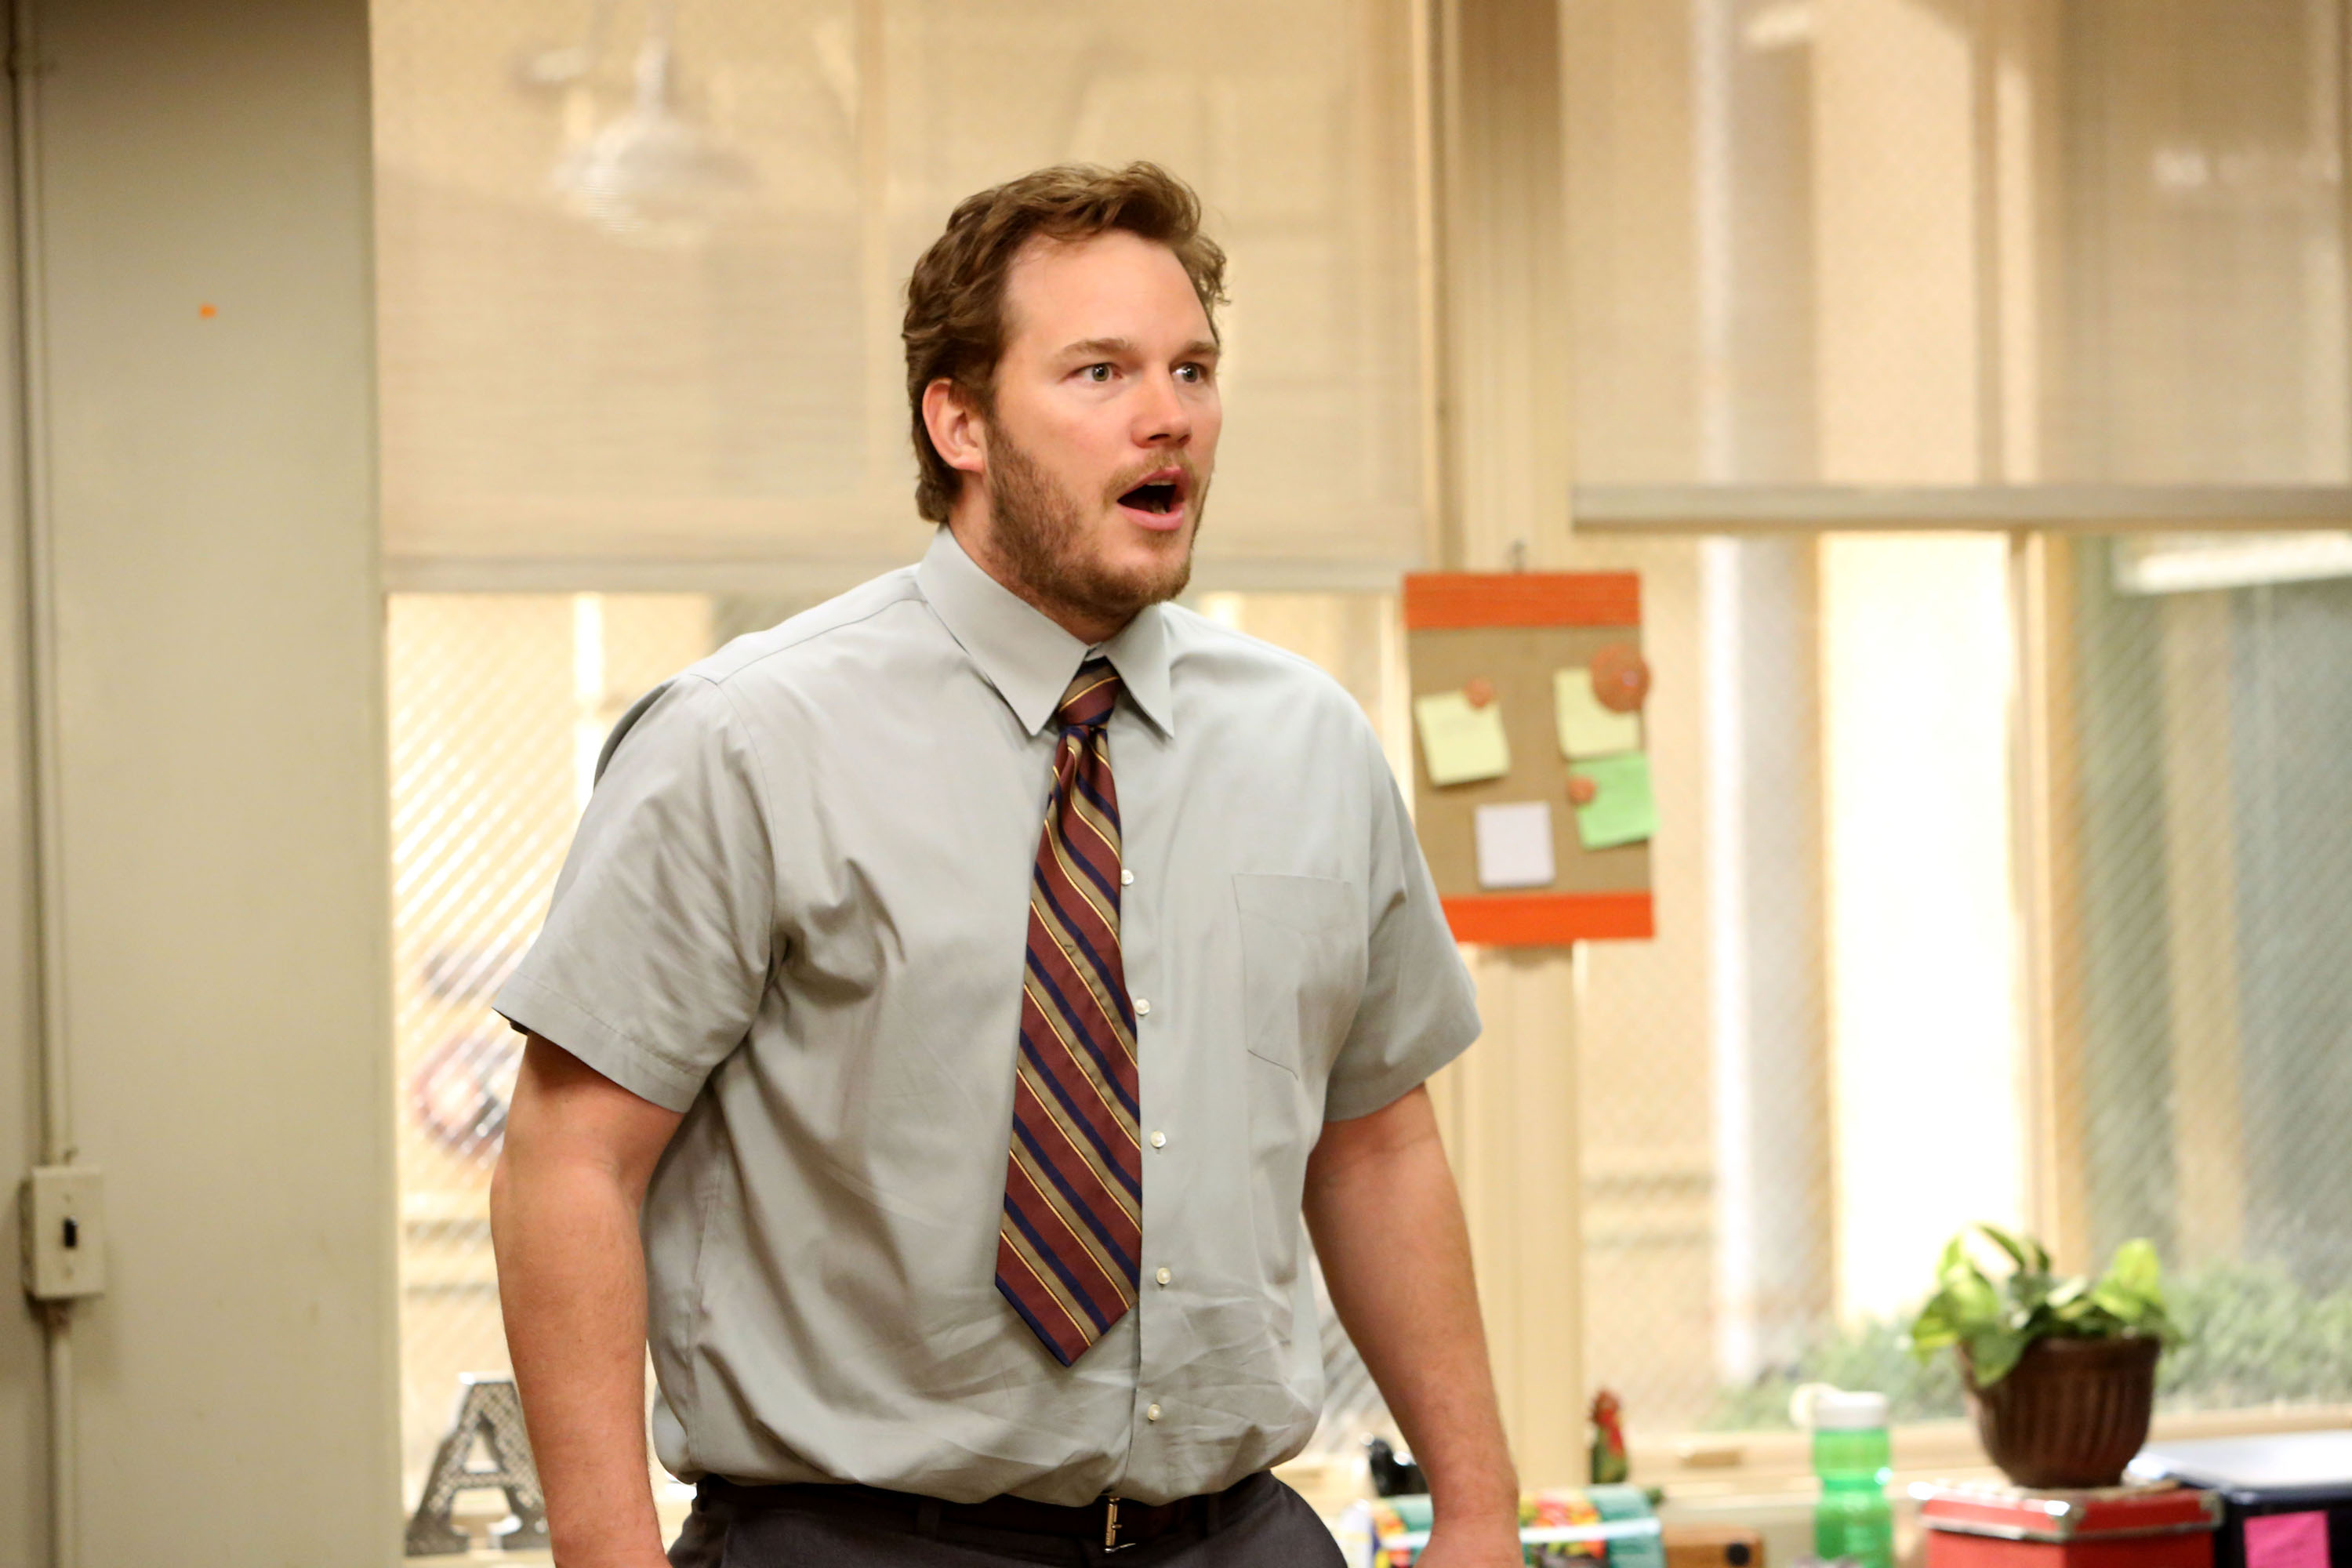 Chris Pratt wears a shirt and tie on Parks and Recreation